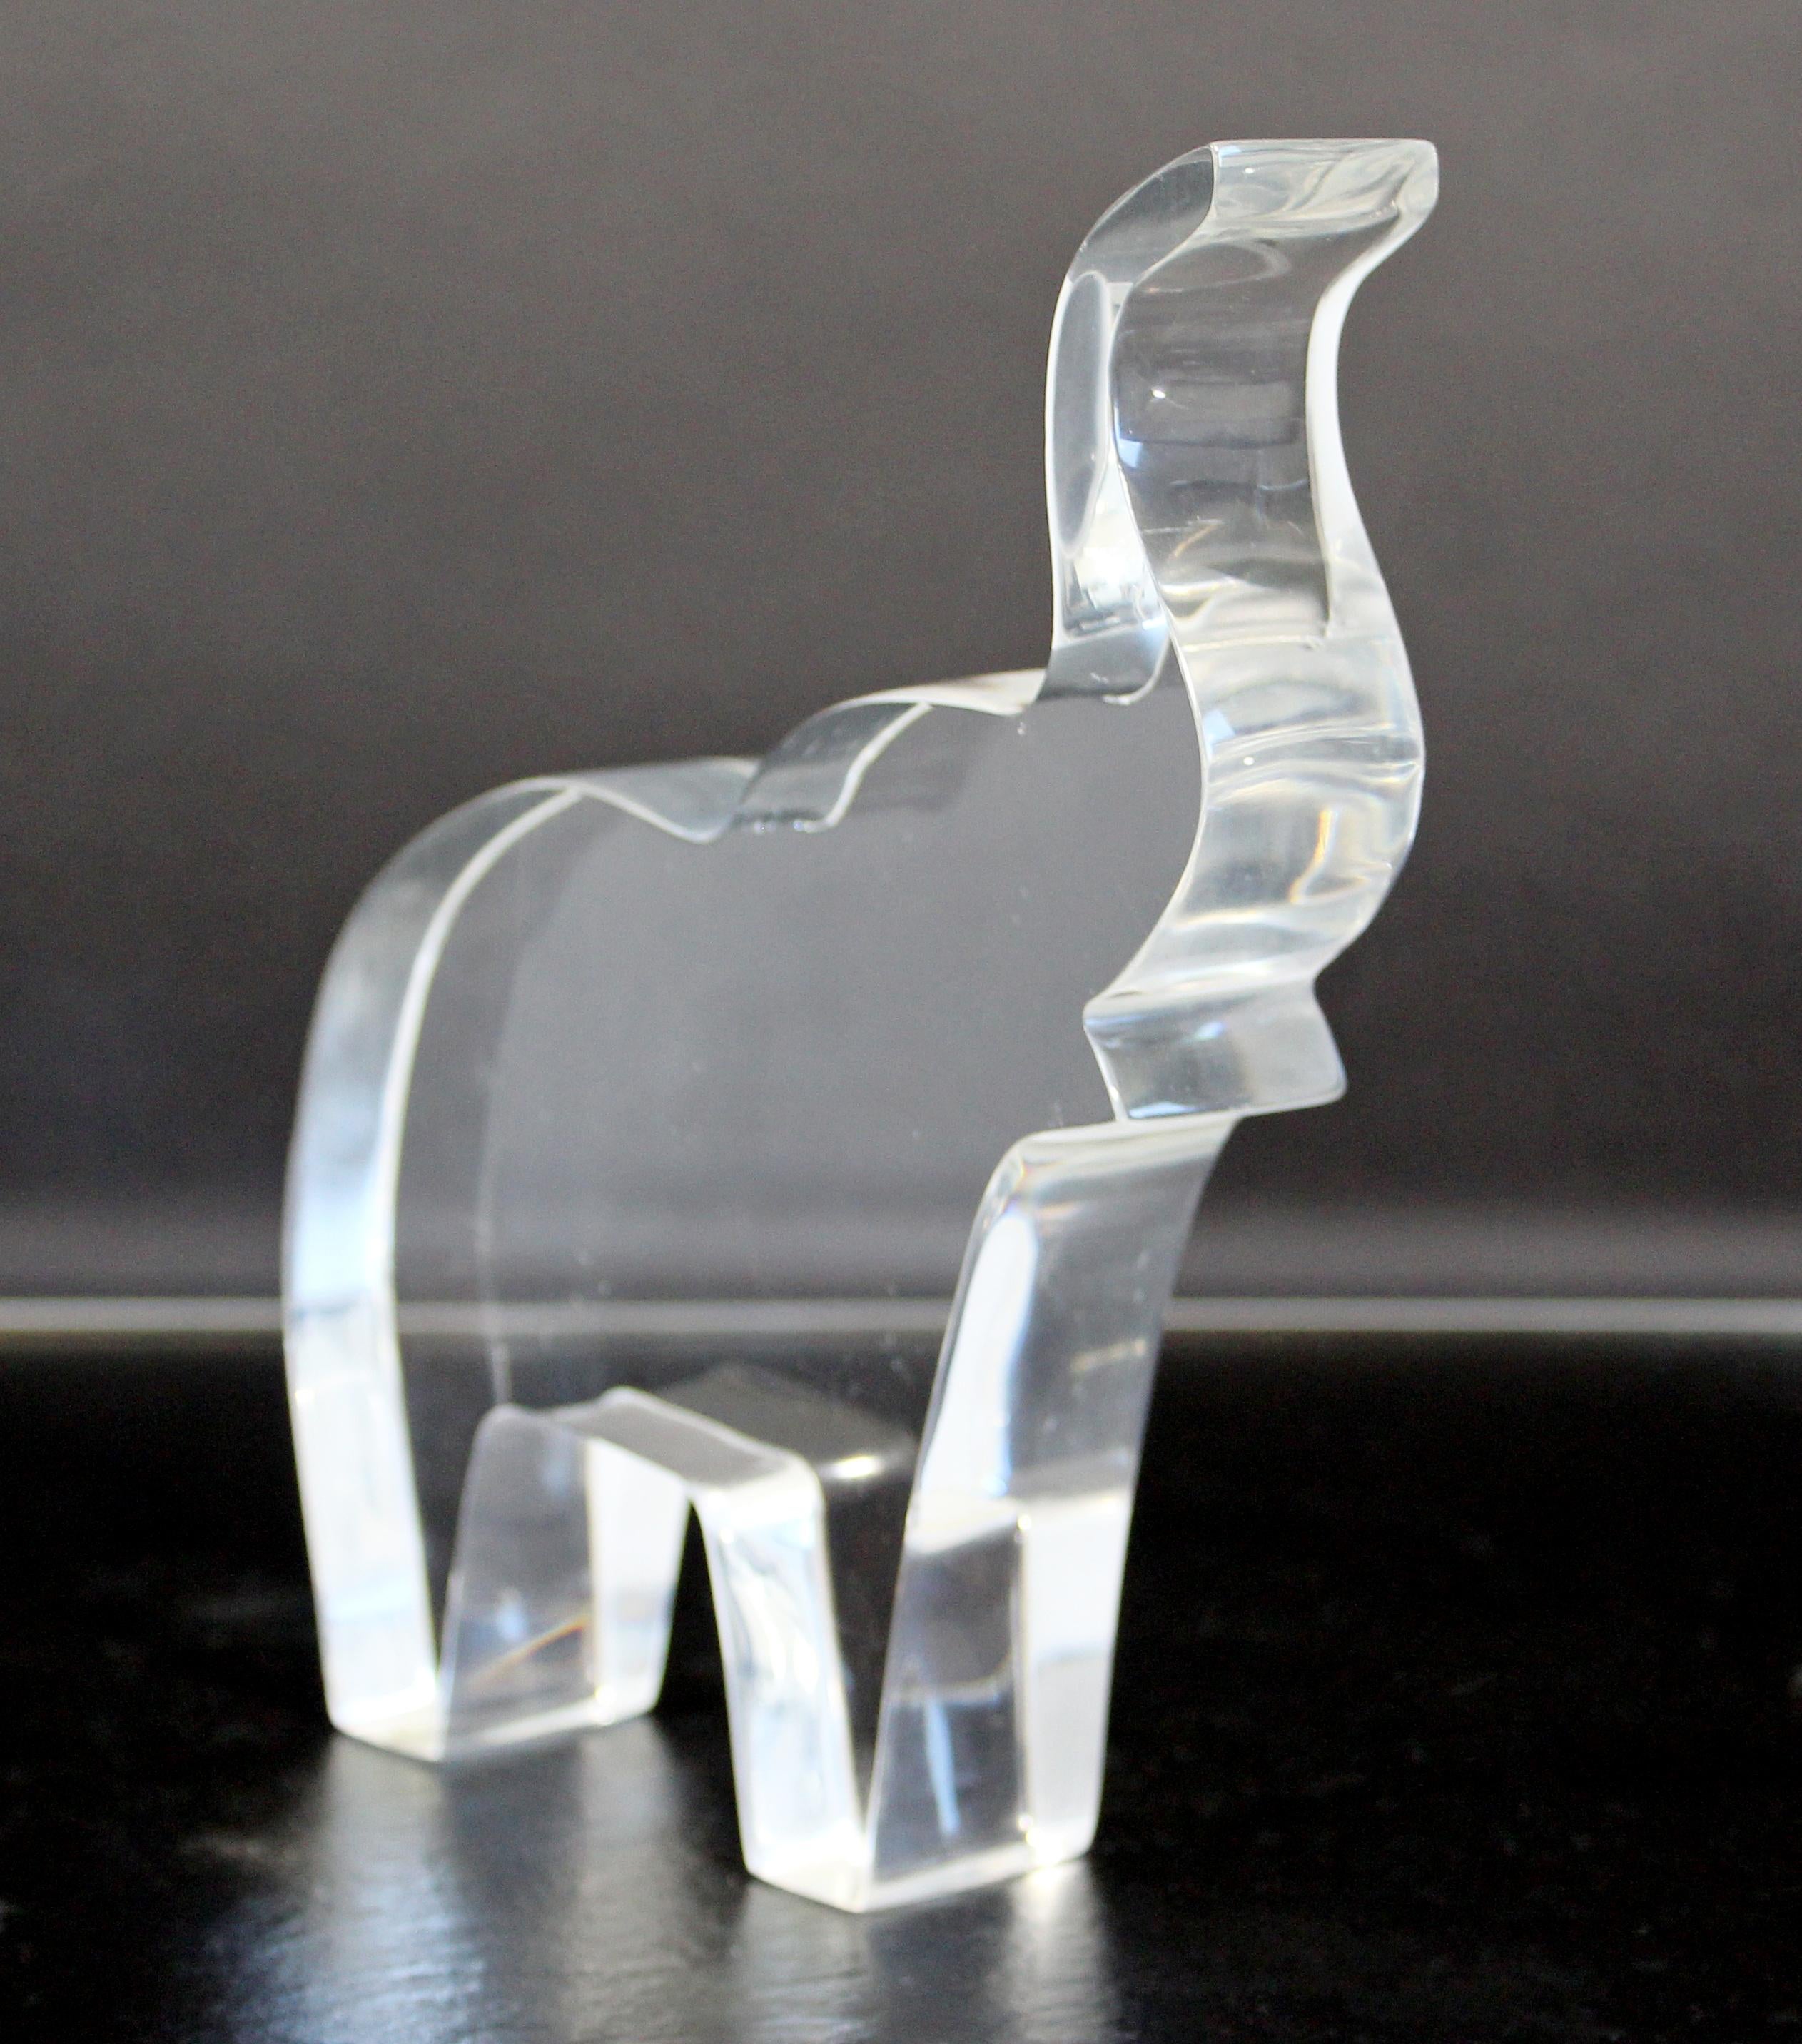 For your consideration is a sweet elephant table sculpture, made of clear Lucite, in the style of Guzzini, circa 1970s. In excellent vintage condition. The dimensions are 6